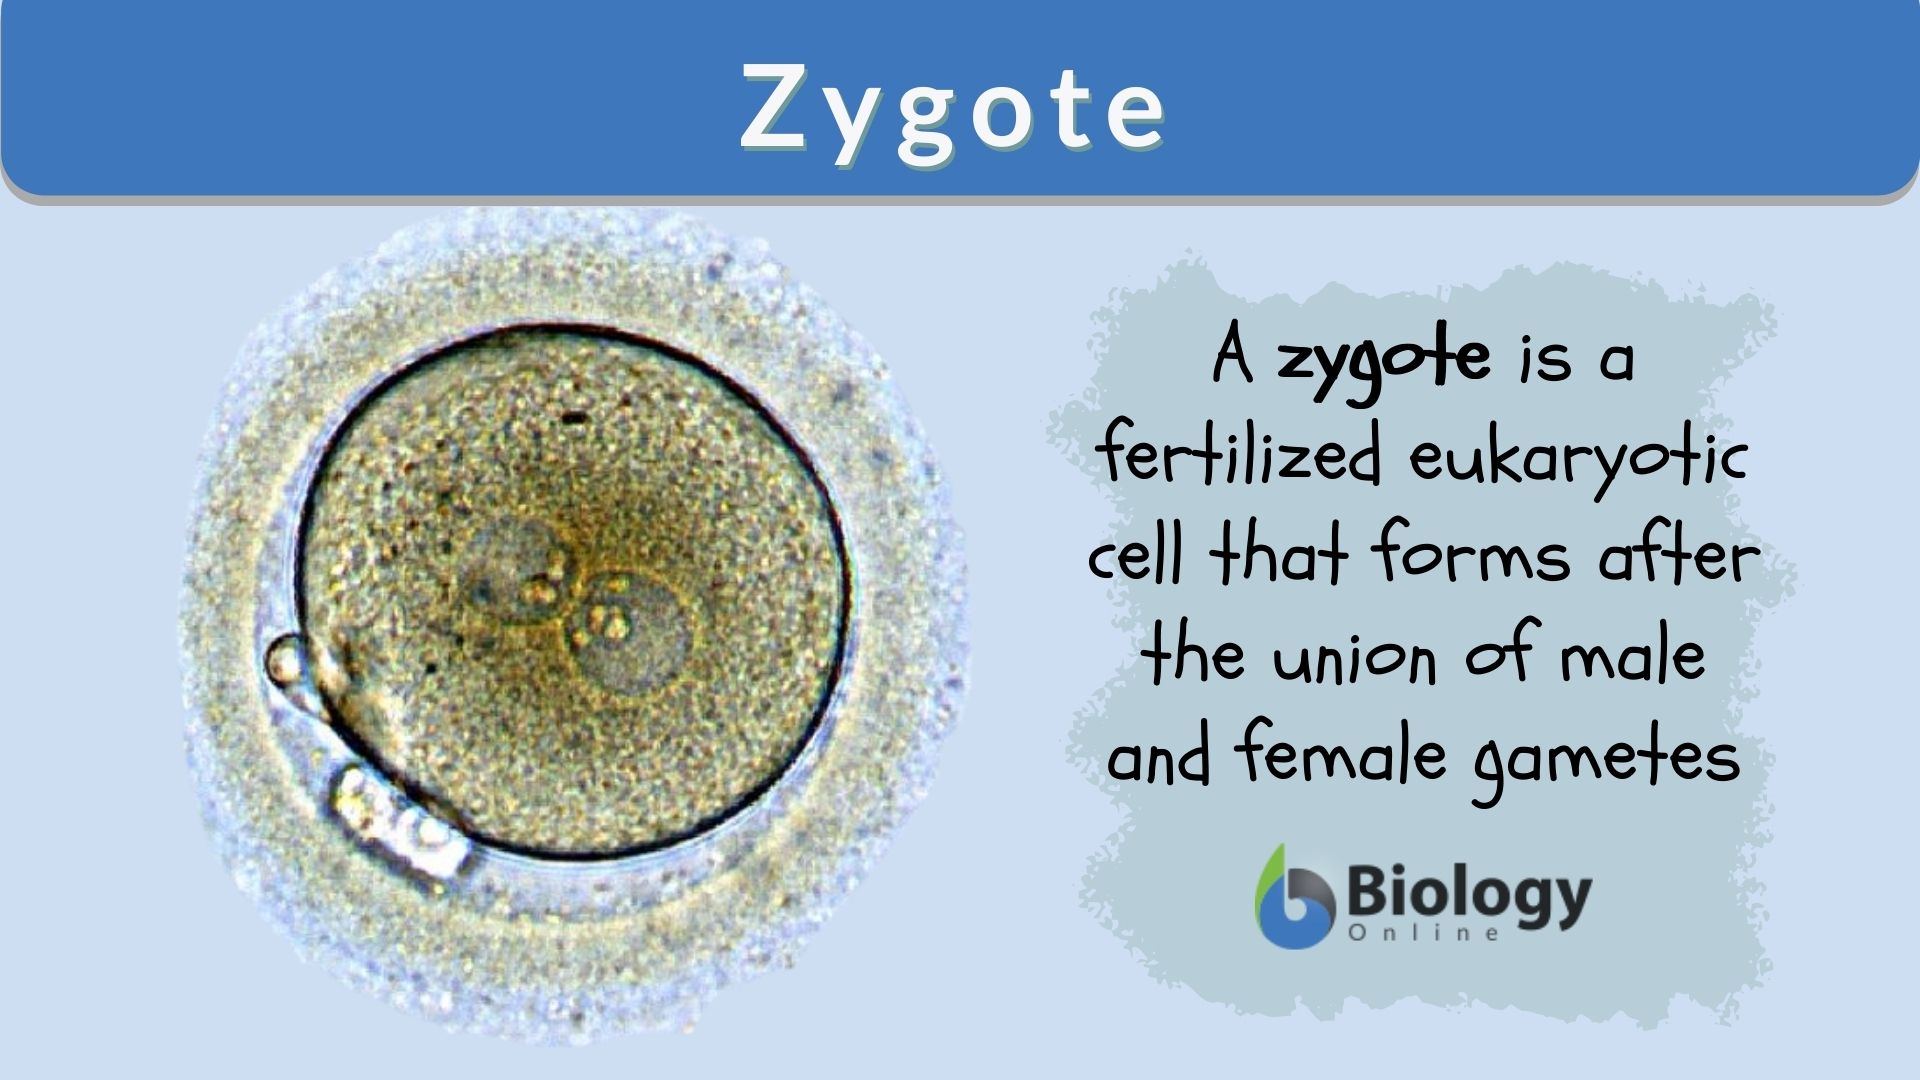 Zygote Definition and Examples - Biology Online Dictionary